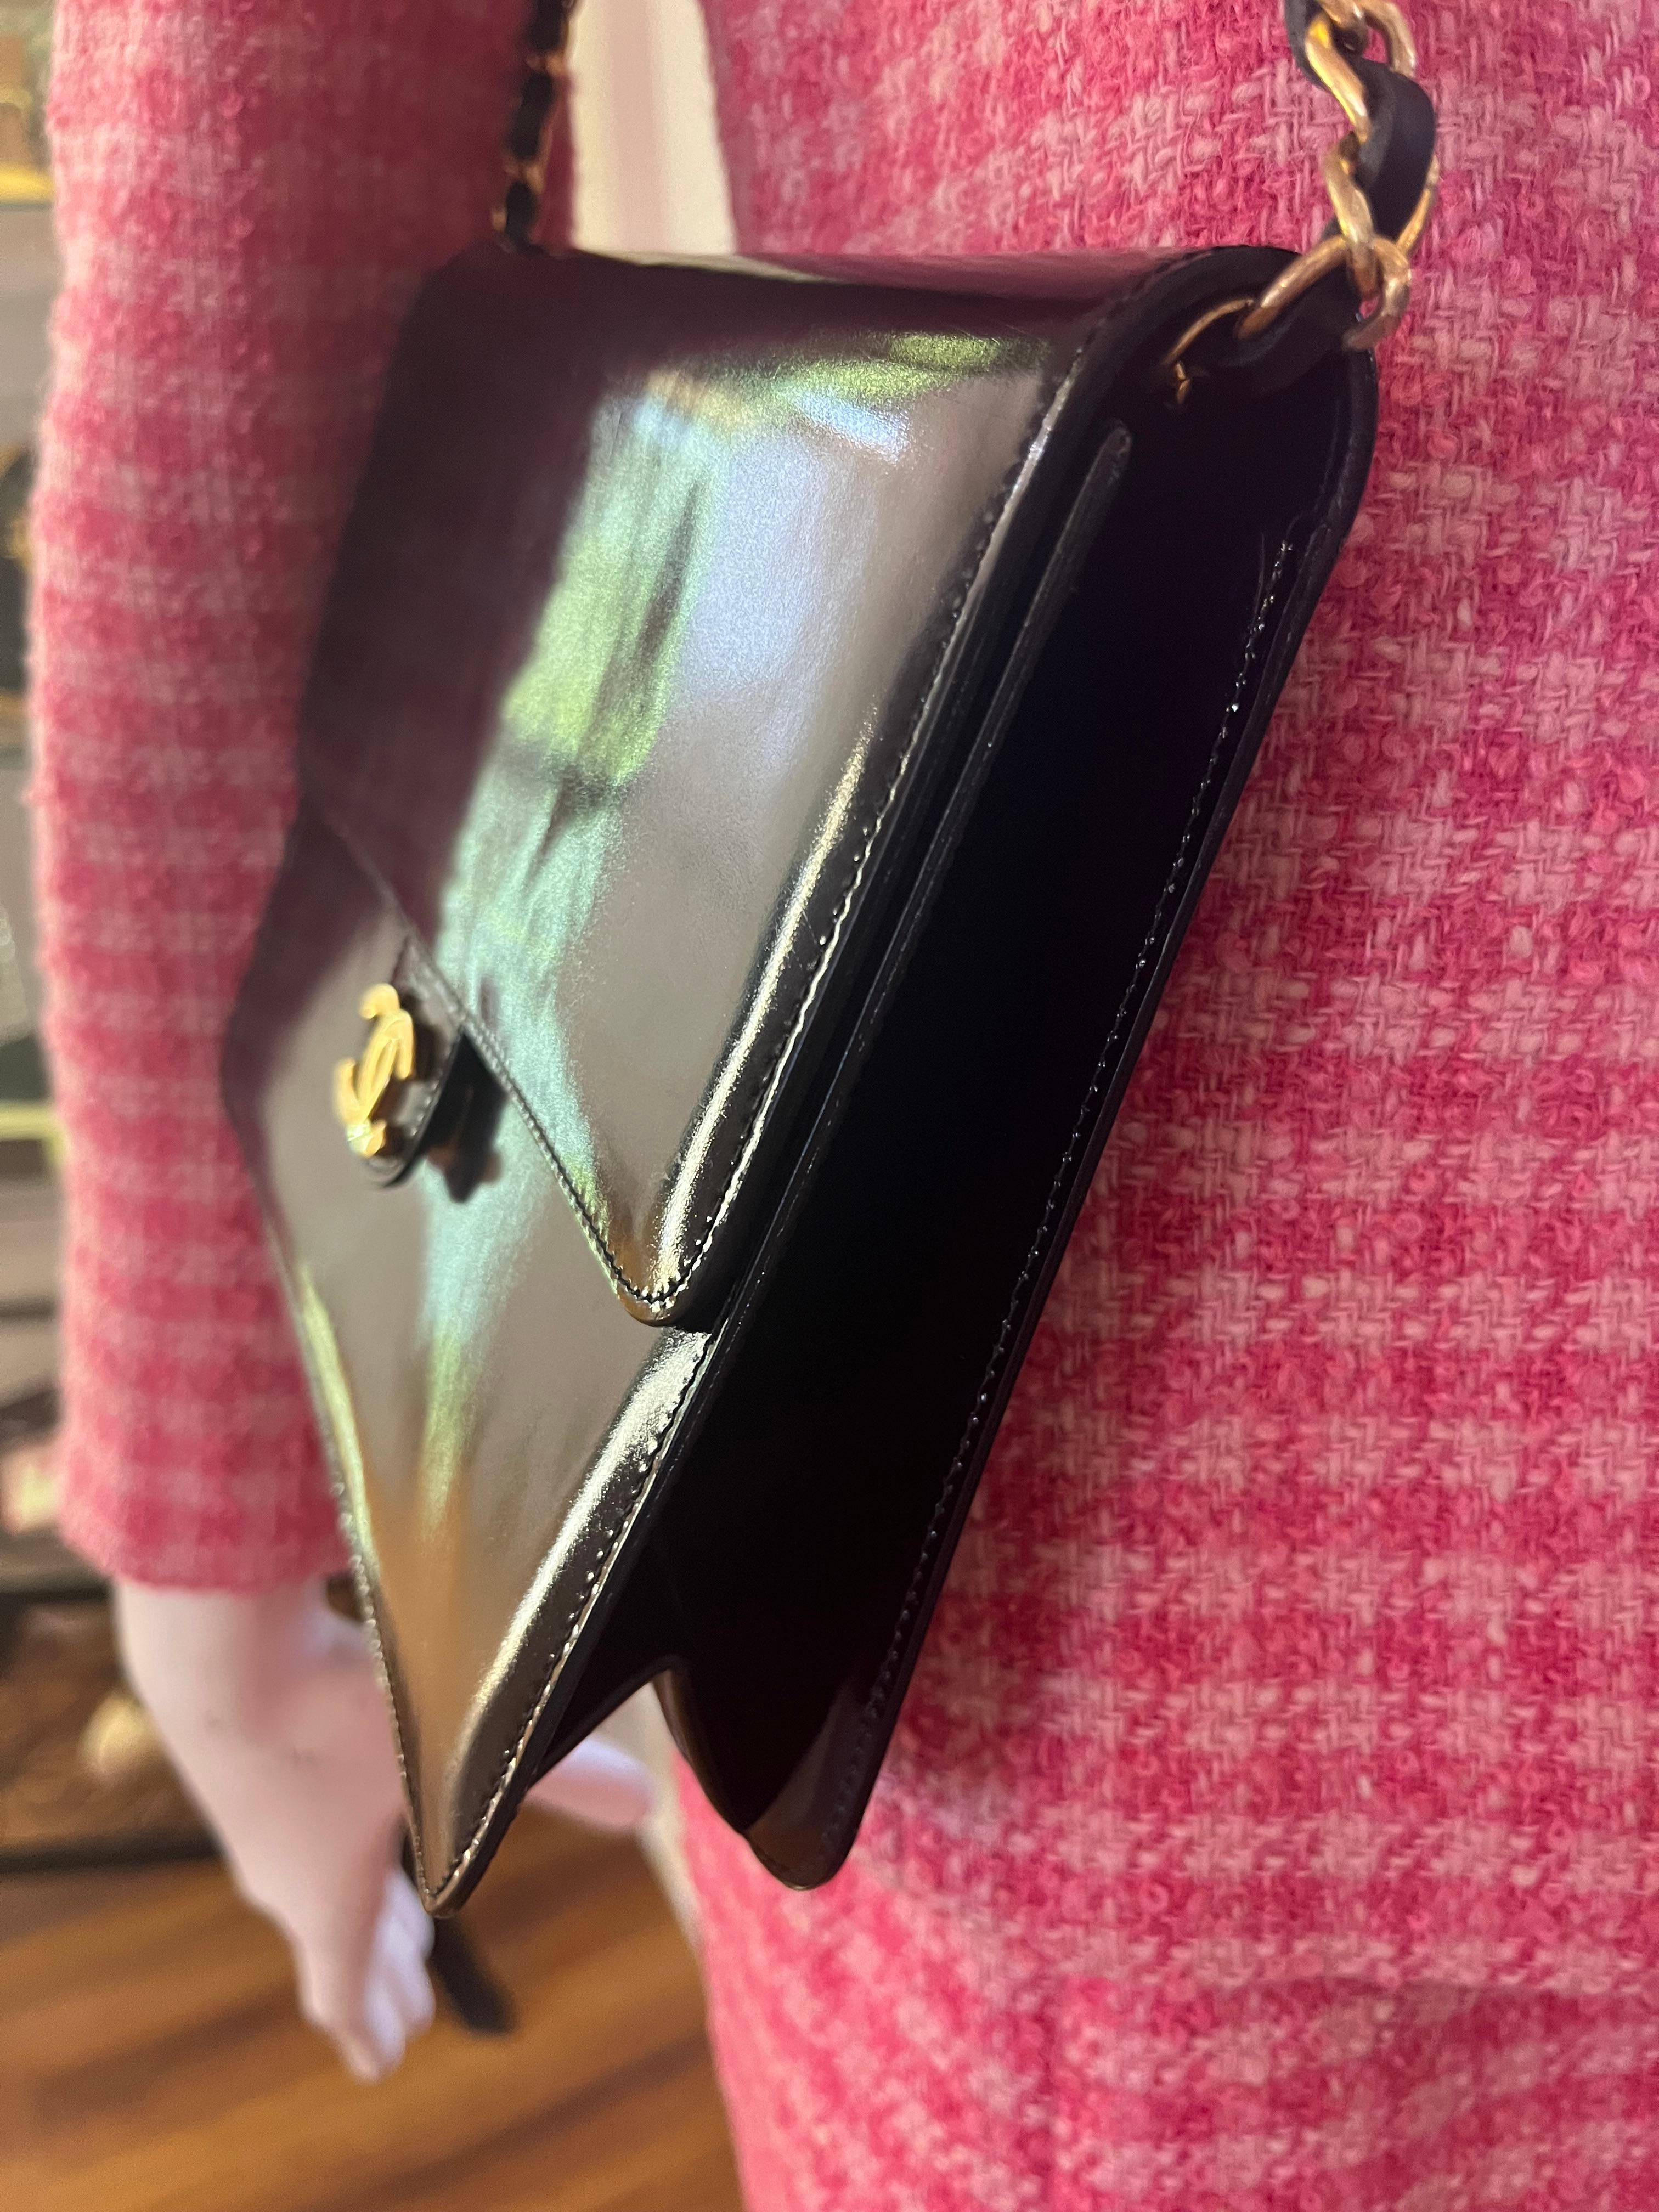 1986-88 Chanel Black Patent Leather Handbag w/COA and Card In Good Condition For Sale In Port Hope, ON